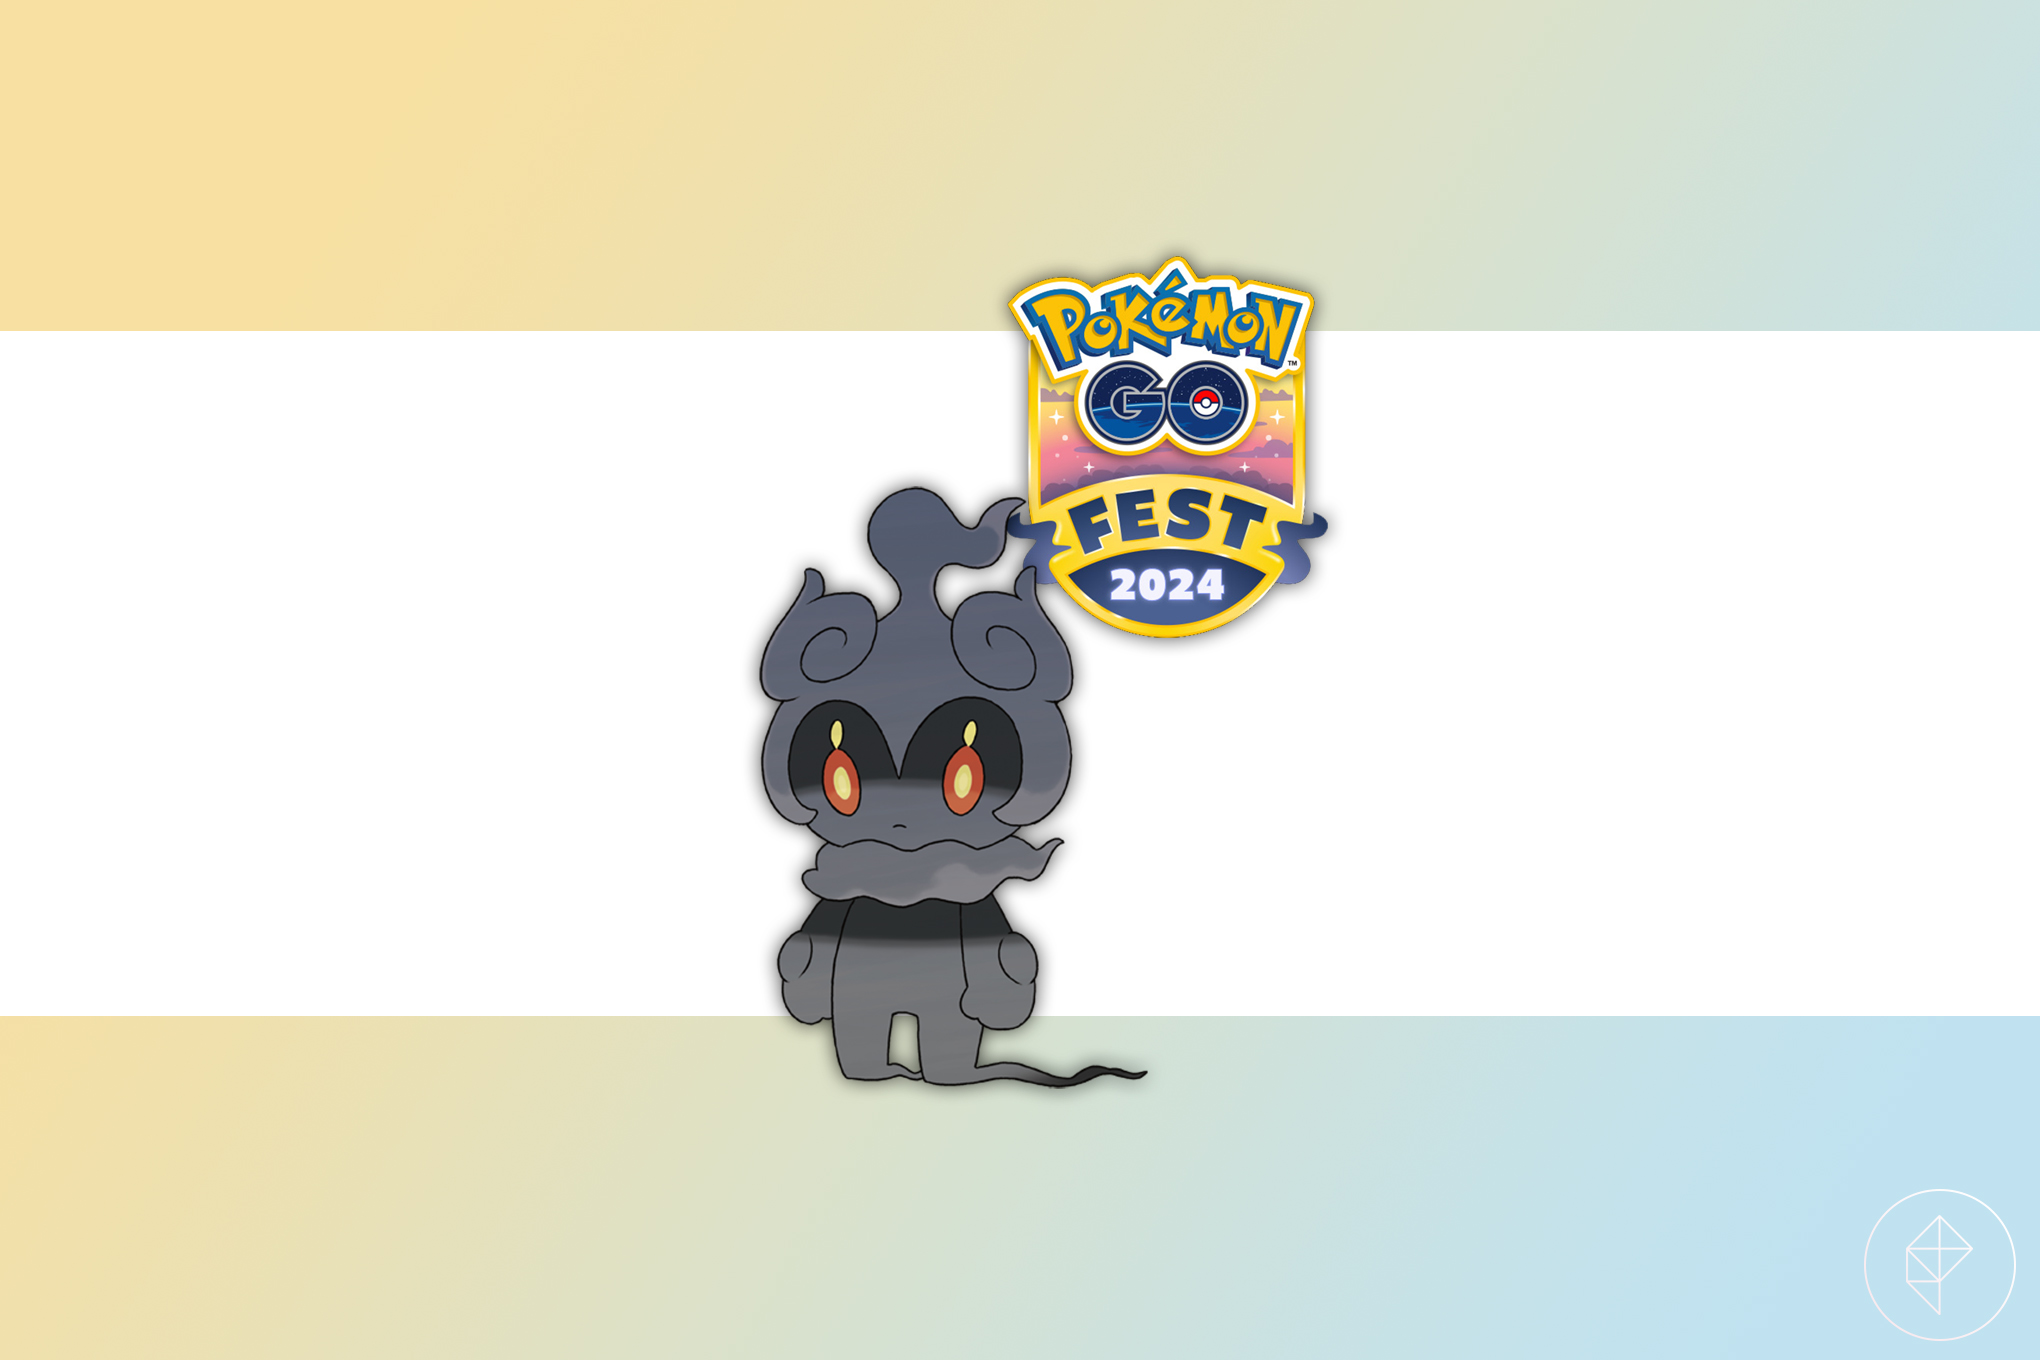 Marshadow stands ominously in front of the Pokémon Go Fest 2024 logo